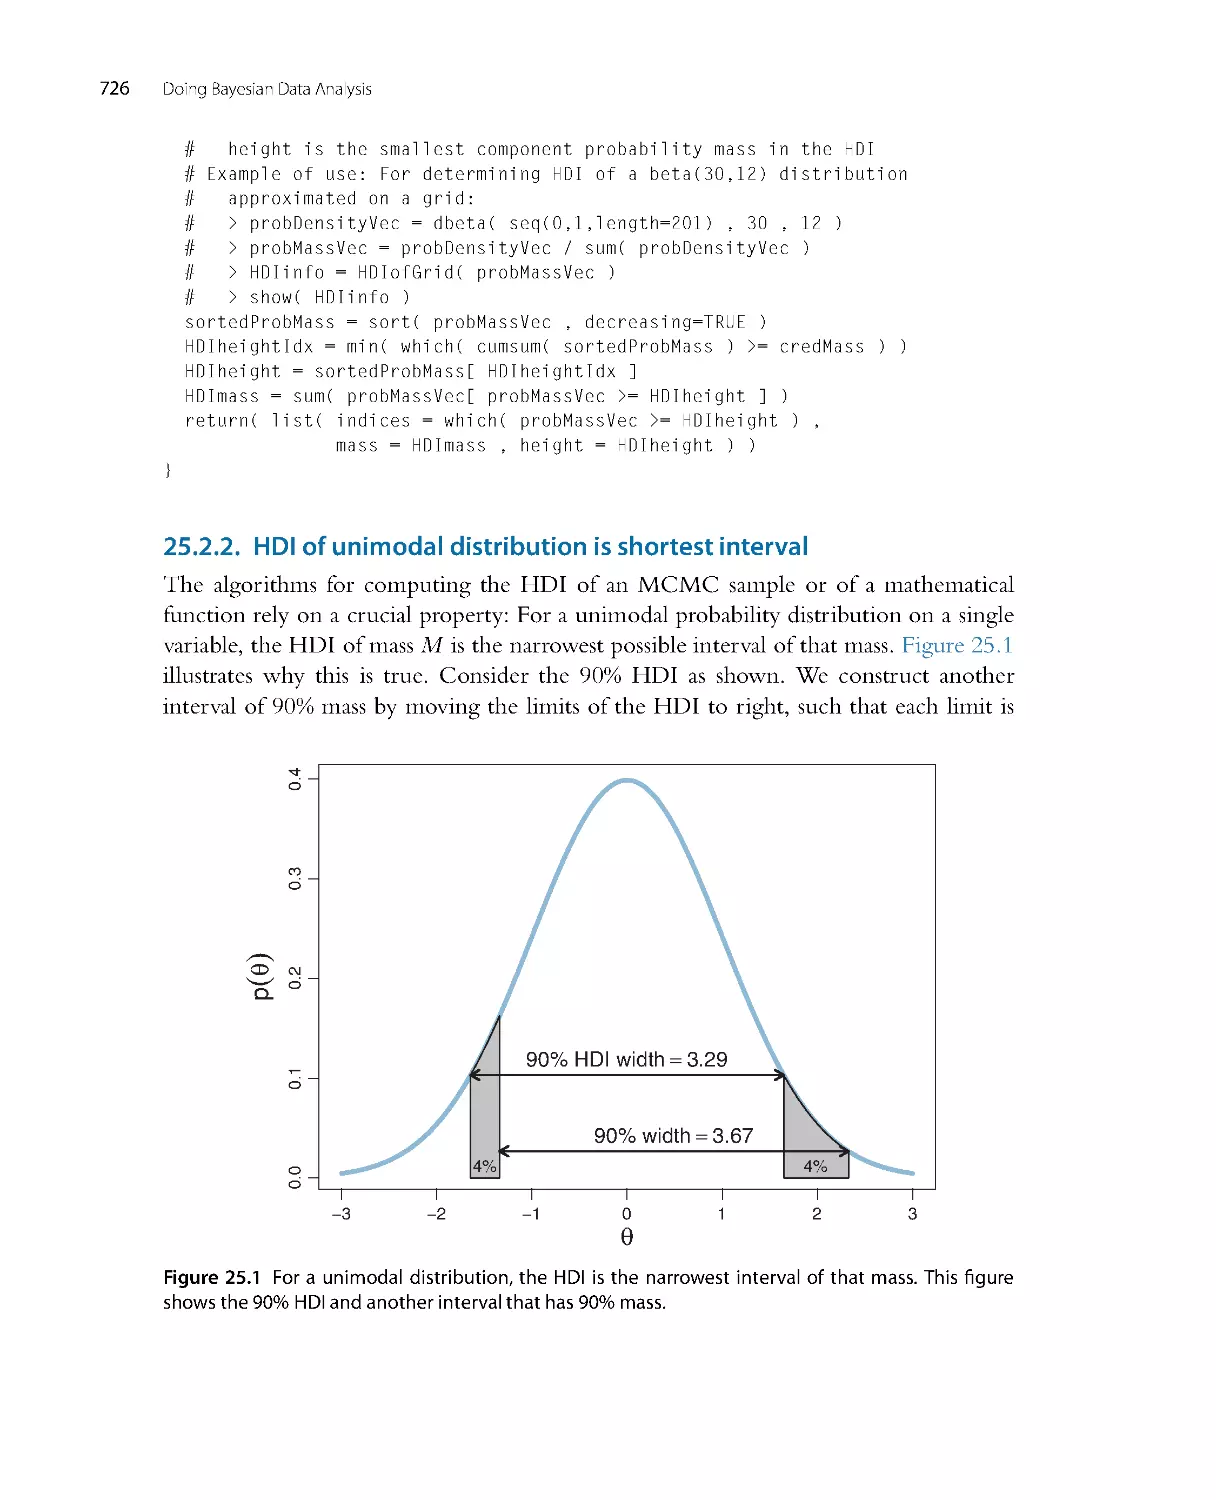 HDI of unimodal distribution is shortest interval